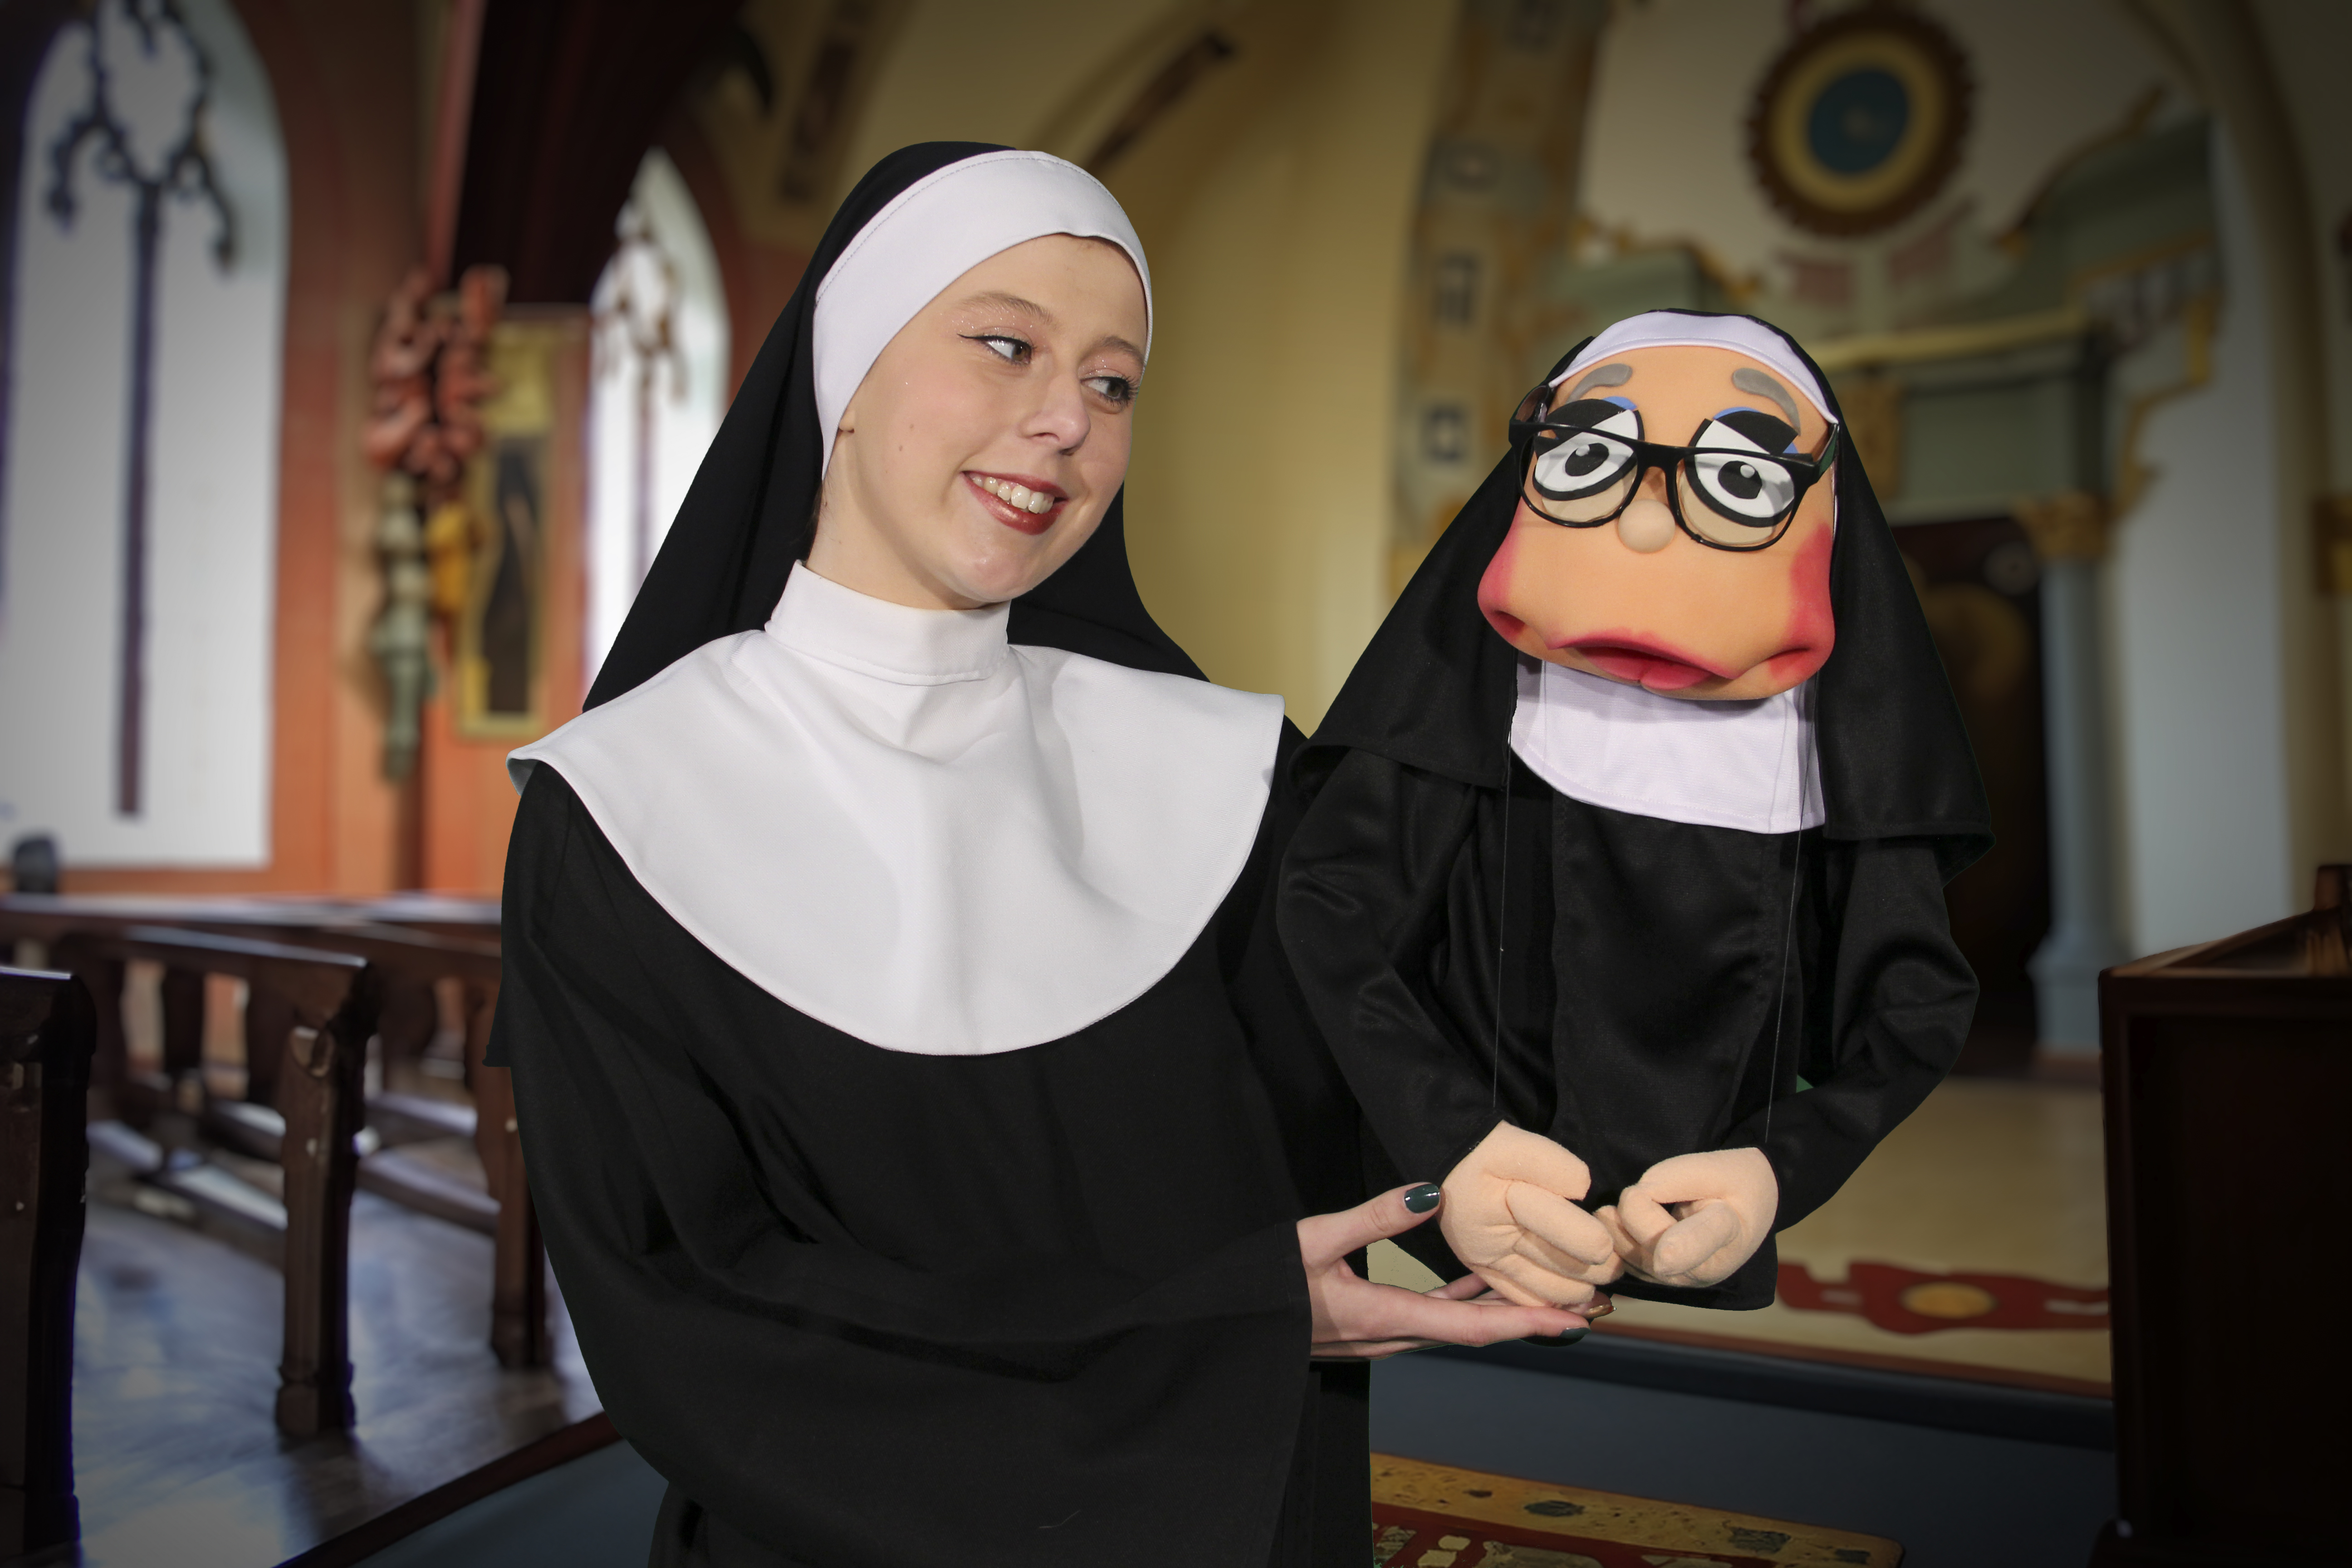 Alexis Bellhorn as Sister Mary Amnesia (with a special appearance by Sister Mary Annette as herself!).